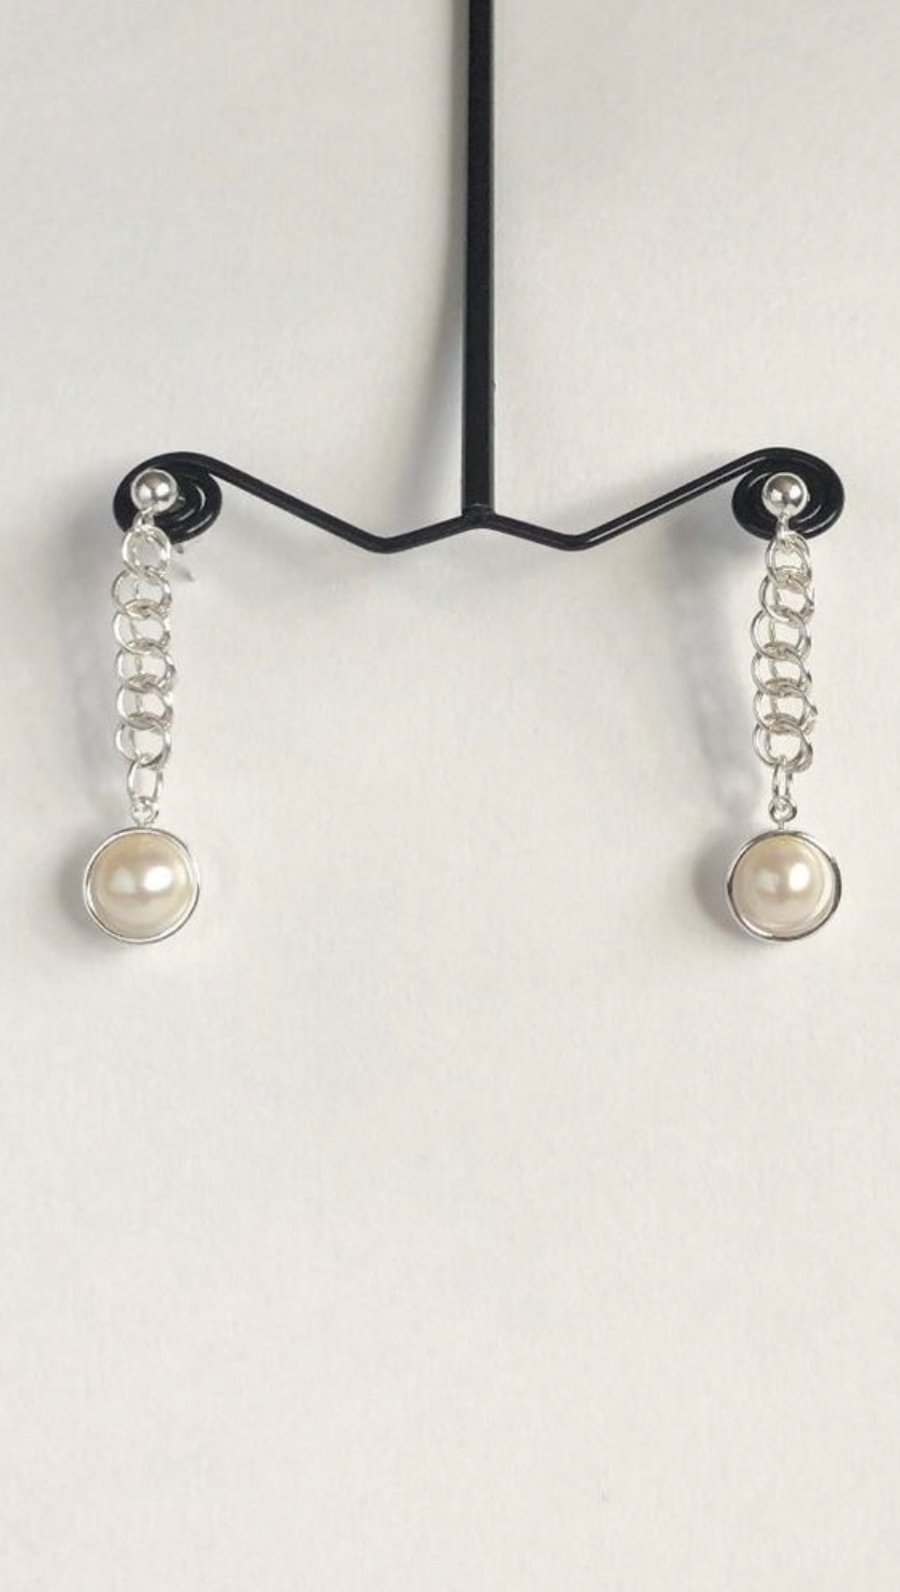 Freshwater Cultured Pearl Chainmaille Earrings “Last One Available”